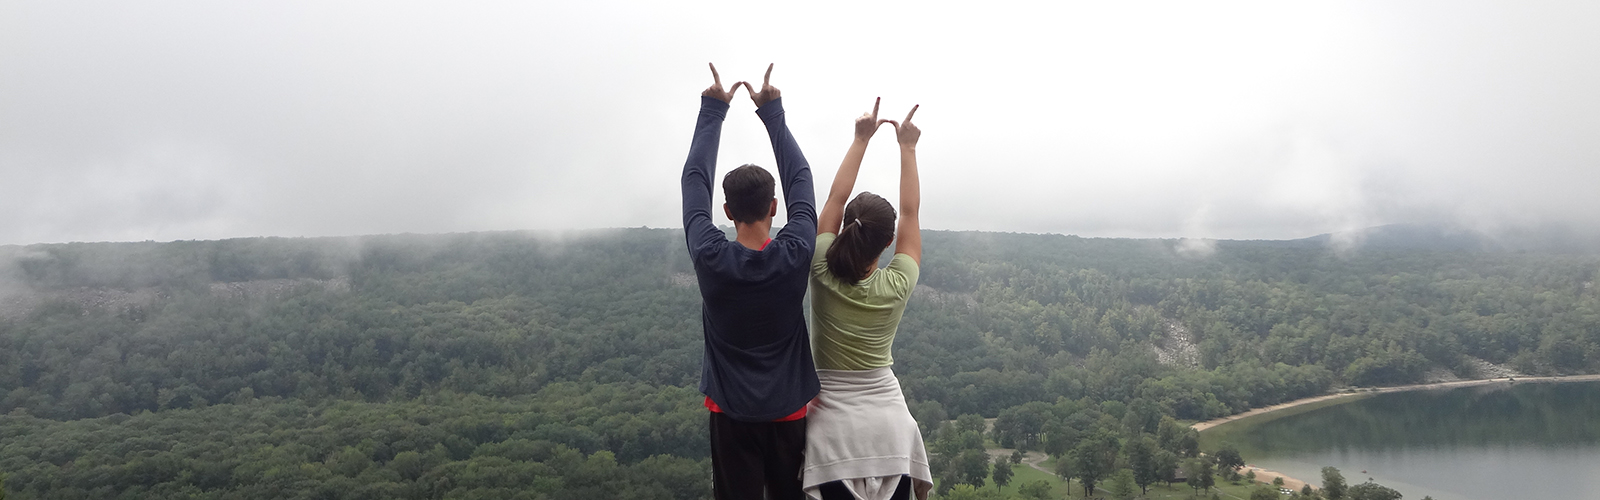 VISP students make the sign of 'W' while overlooking a scenic view.